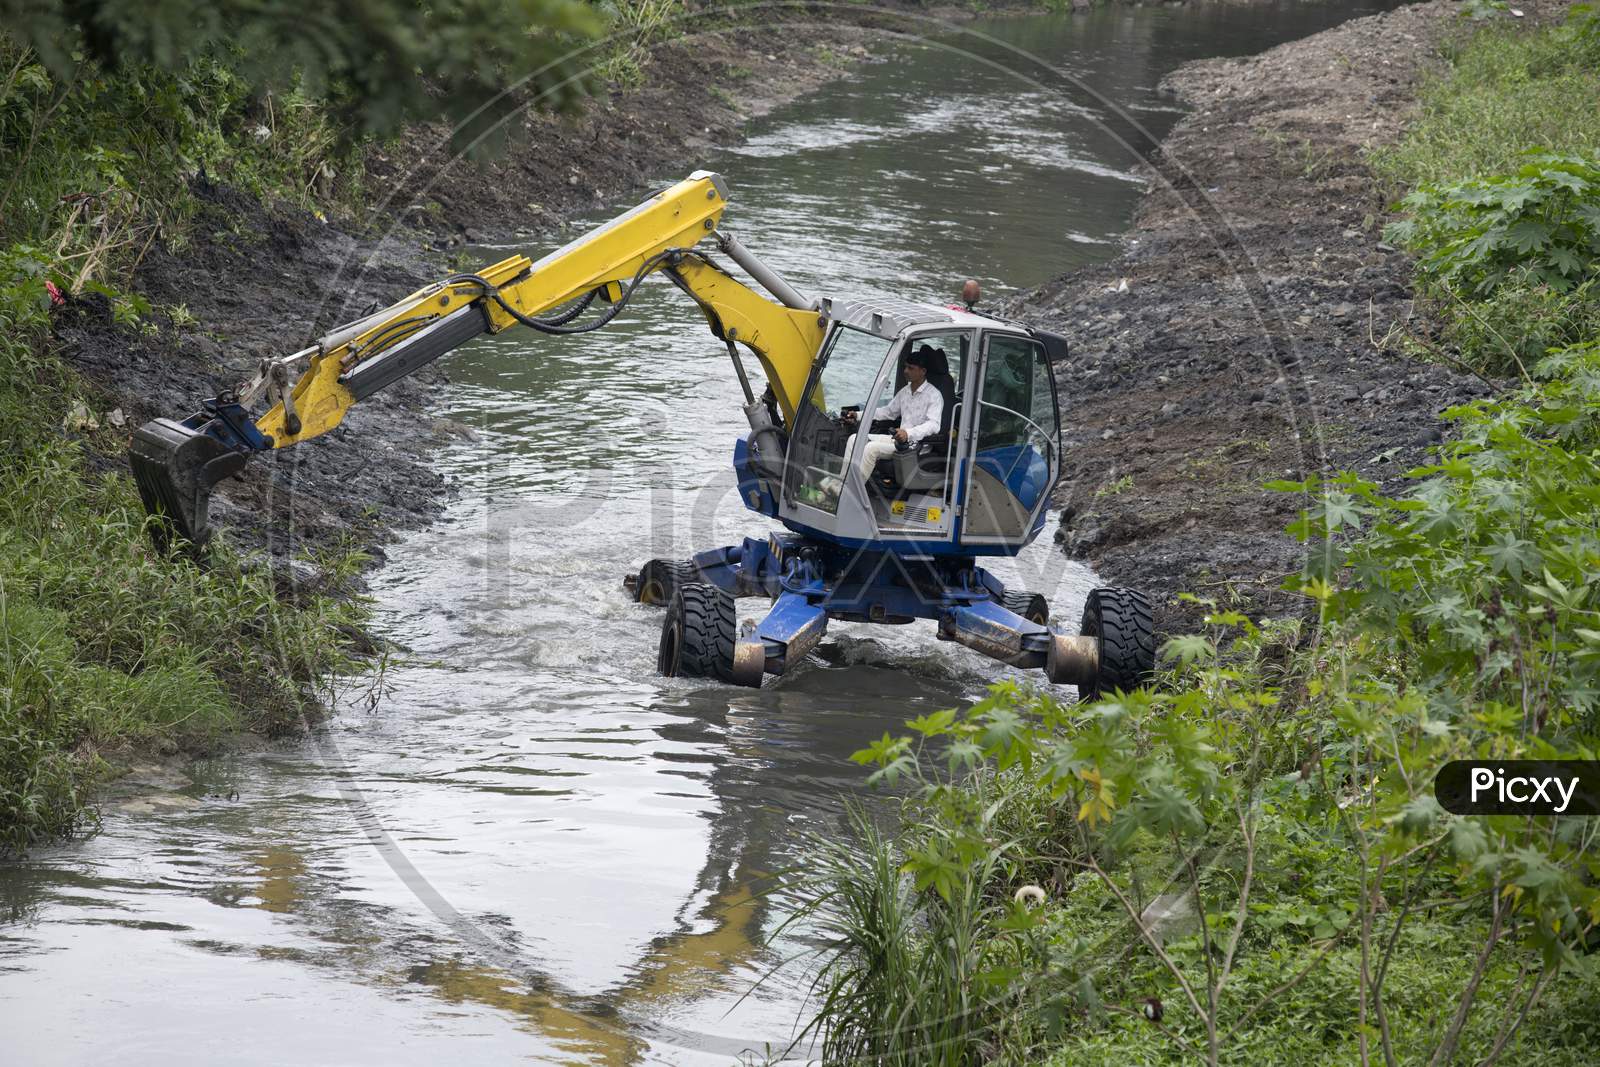 Excavator Performing River Dredging And Clearing Up The River Banks